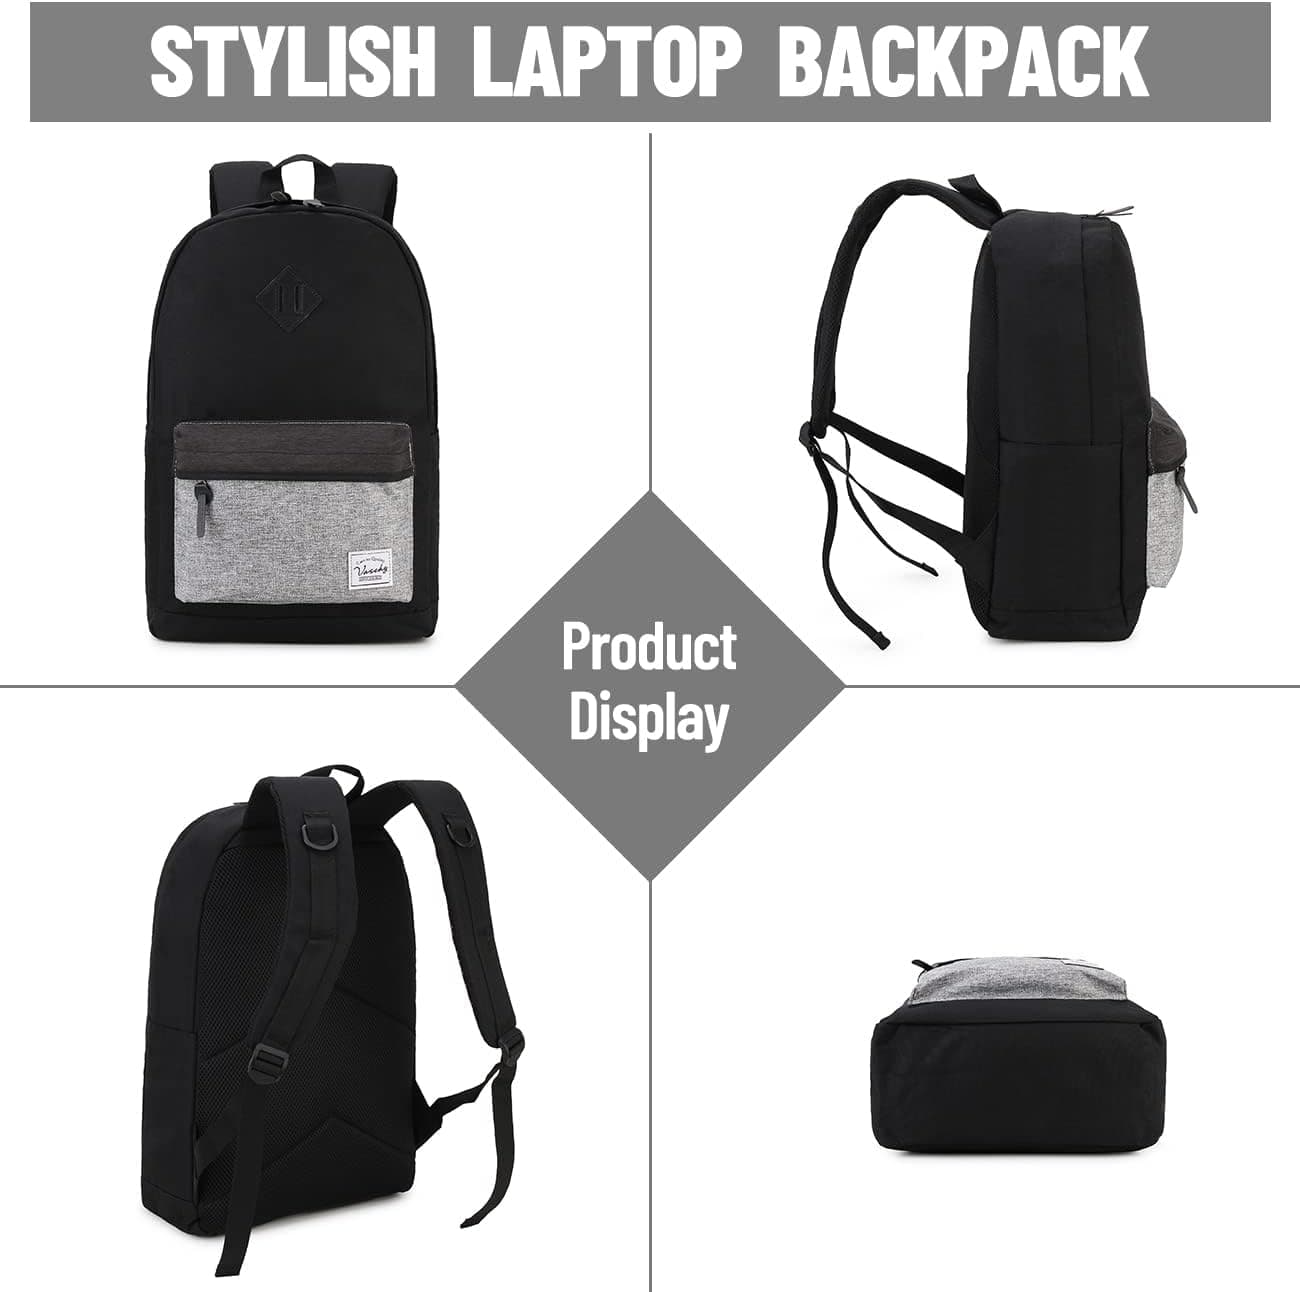  Backpack display from multiple angles